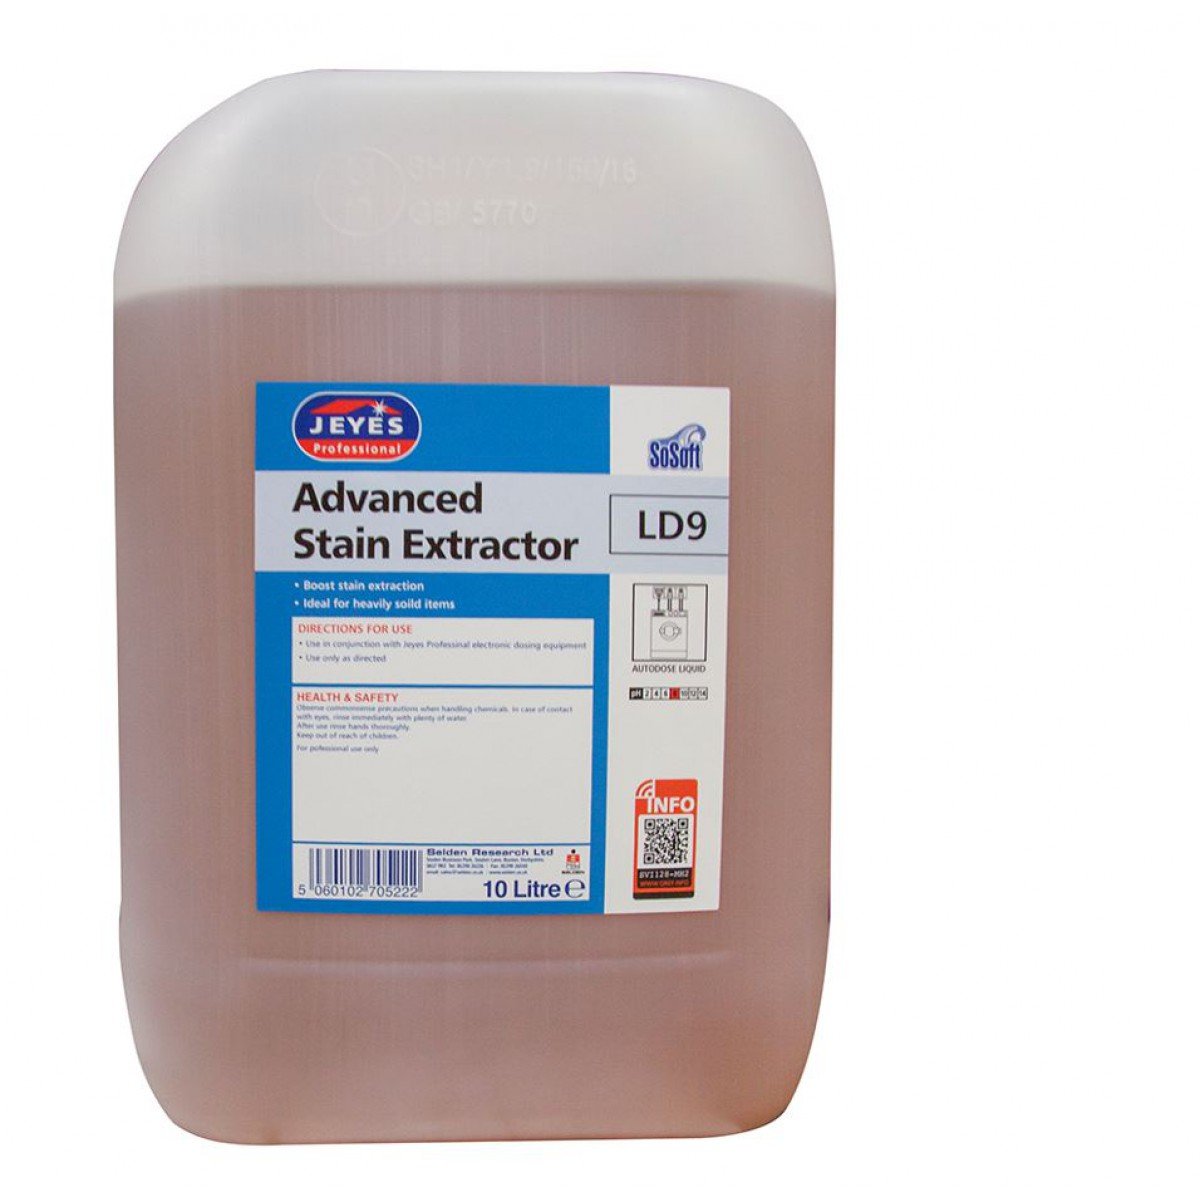 Advanced Stain Extractor